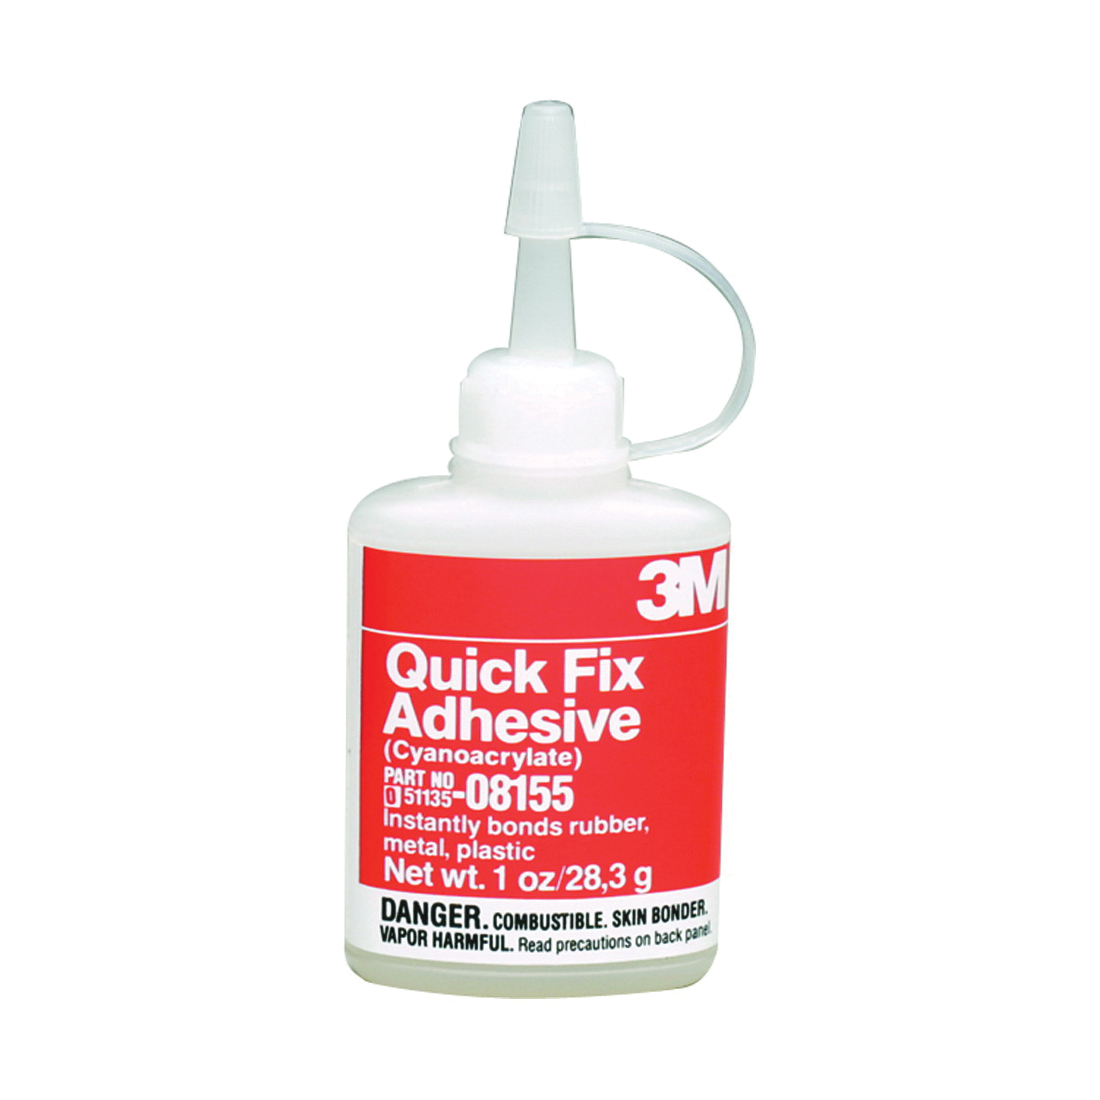 3M™ 051135-08155 1-Component General Purpose Quick-Fix Adhesive, 1 oz Bottle, Clear, 1 min Curing